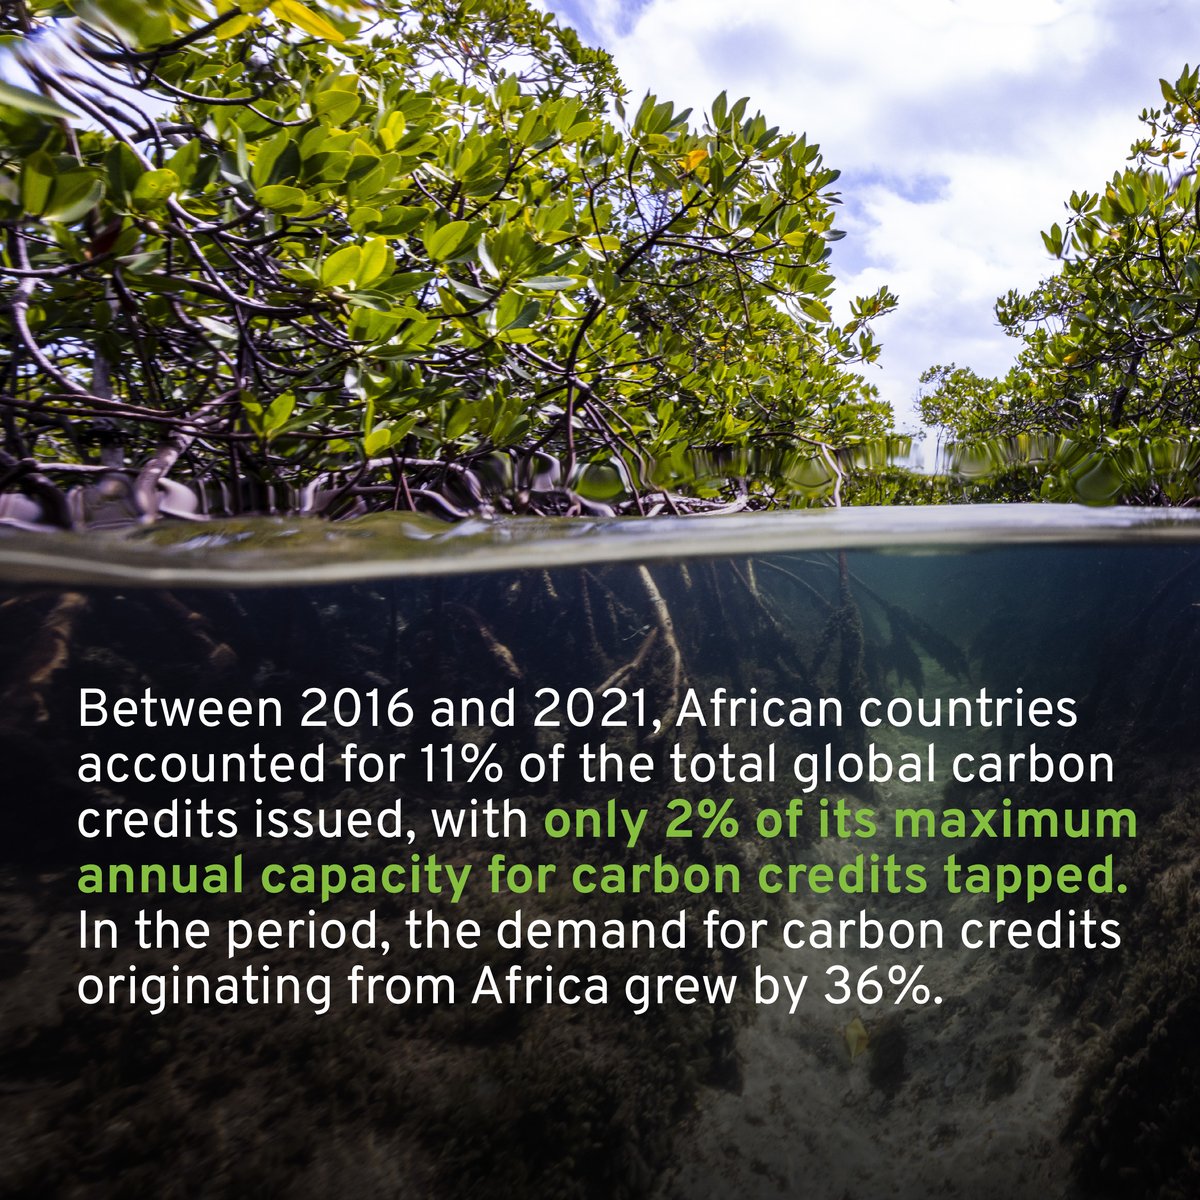 📌DYK

Between 2016 and 2021, African countries accounted for 11% of the total global carbon issued with only 2% of its maximum annual capacity for #carboncredits tapped. 

#Carbonmarketsdialogue #landrightsforum #carbonmarketske